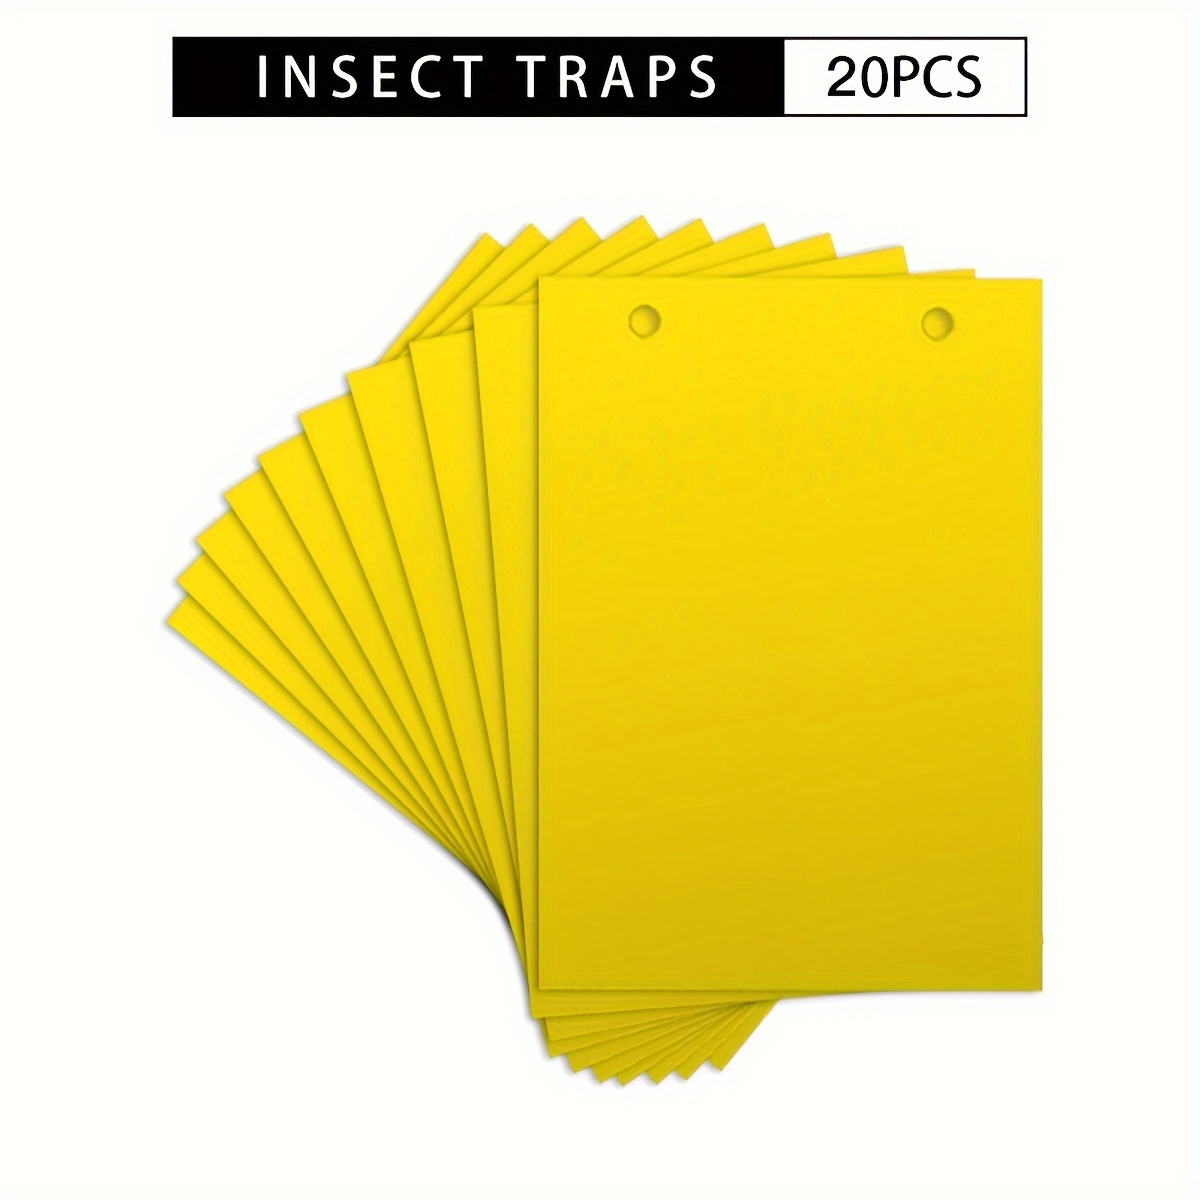 

20pcs, Yellow Sticky Insect Board Insect Trap, Orchard Farm Garden Flying Insect Trap, Indoor And Outdoor Insect Traps, Indoor Outdoor House Kitchen Plants Trees Flying Insects, Pest Control